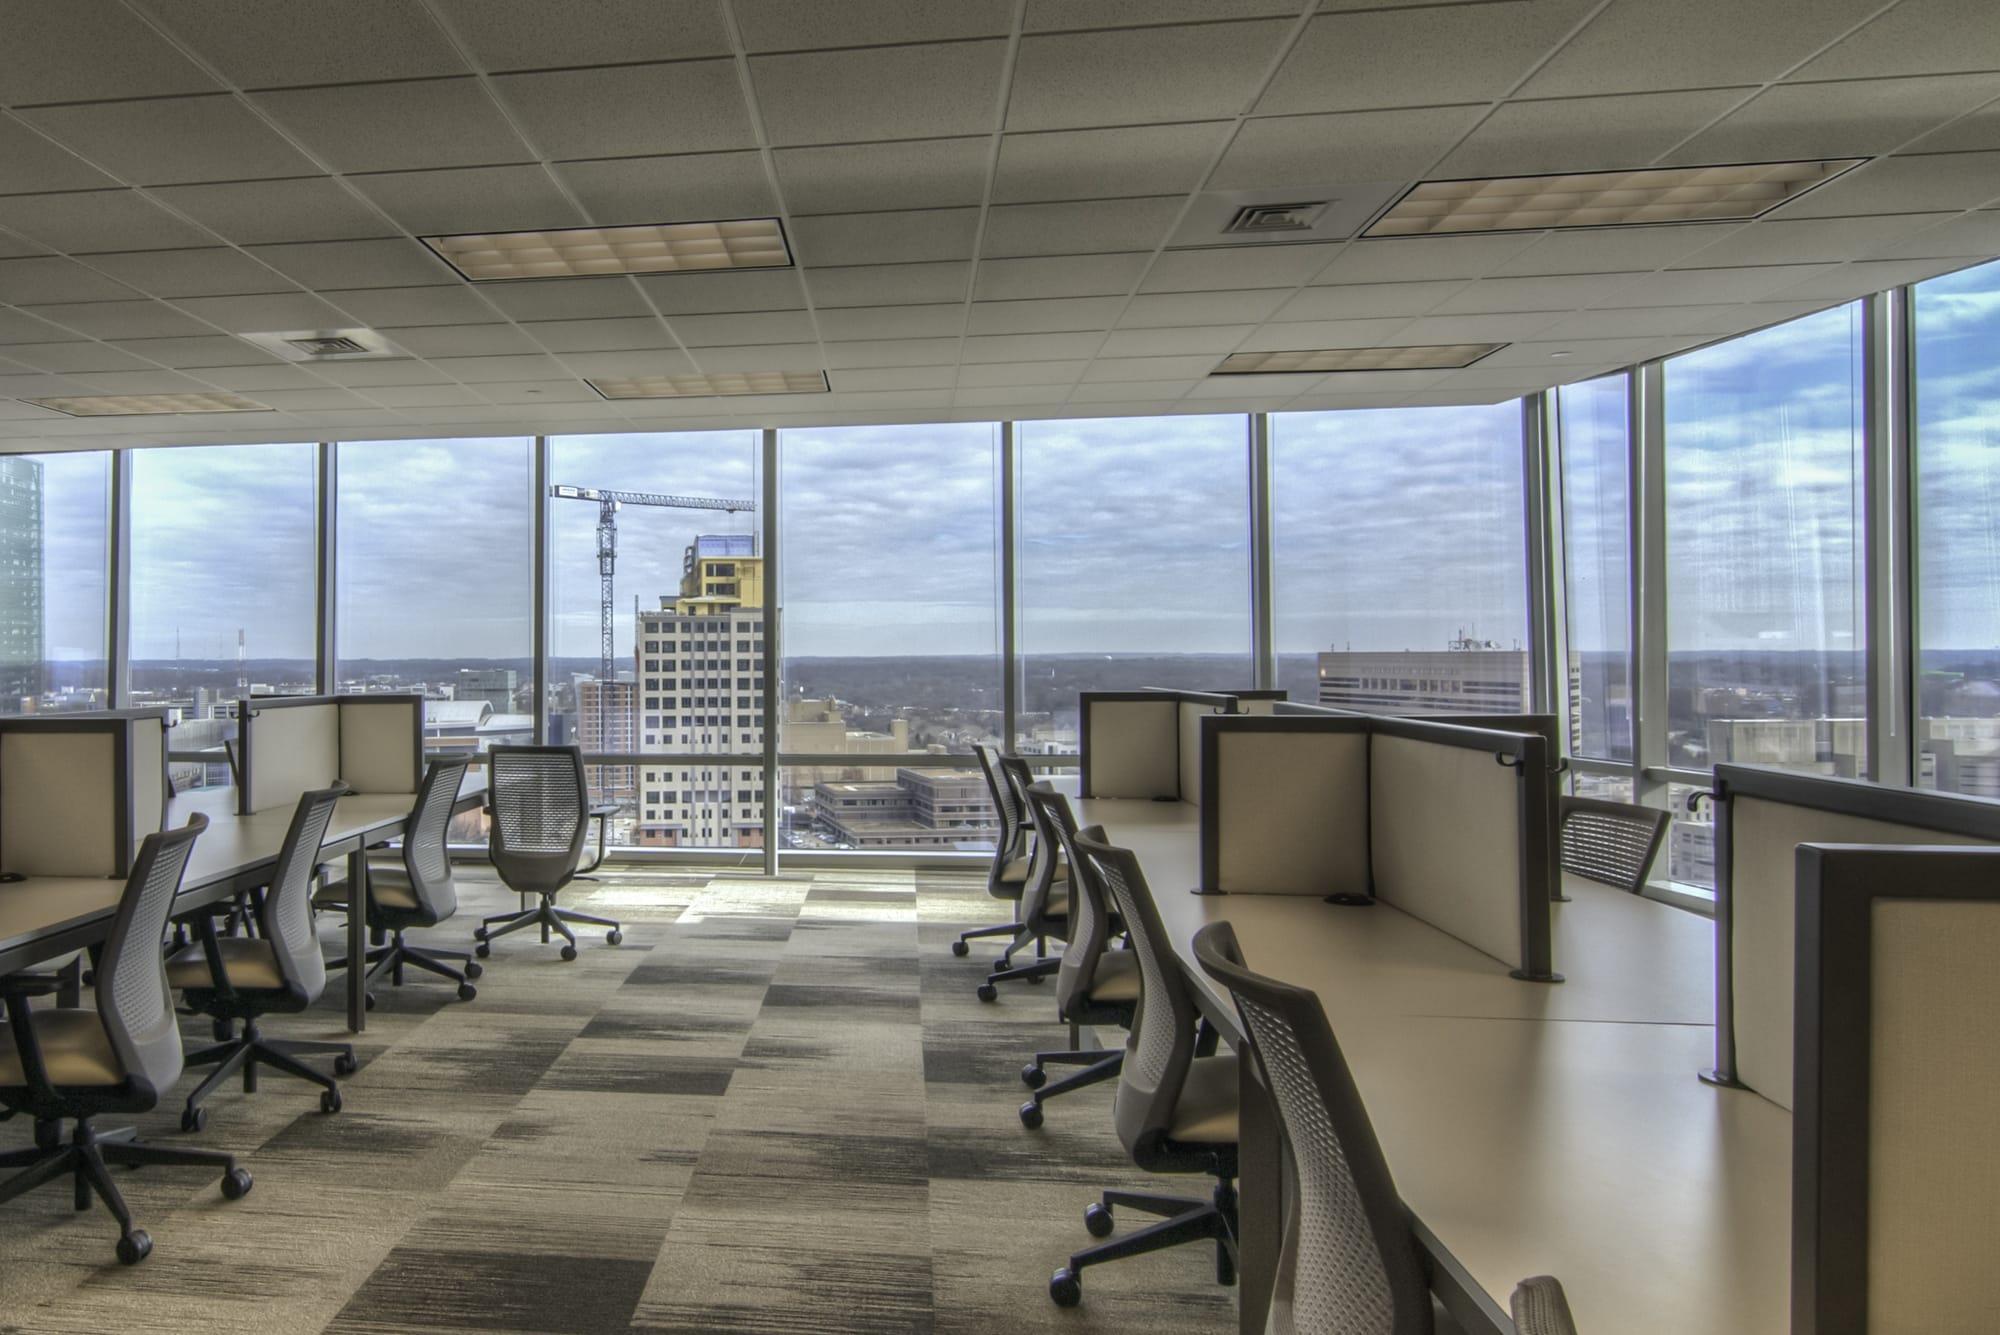 An empty office with a view of a city.